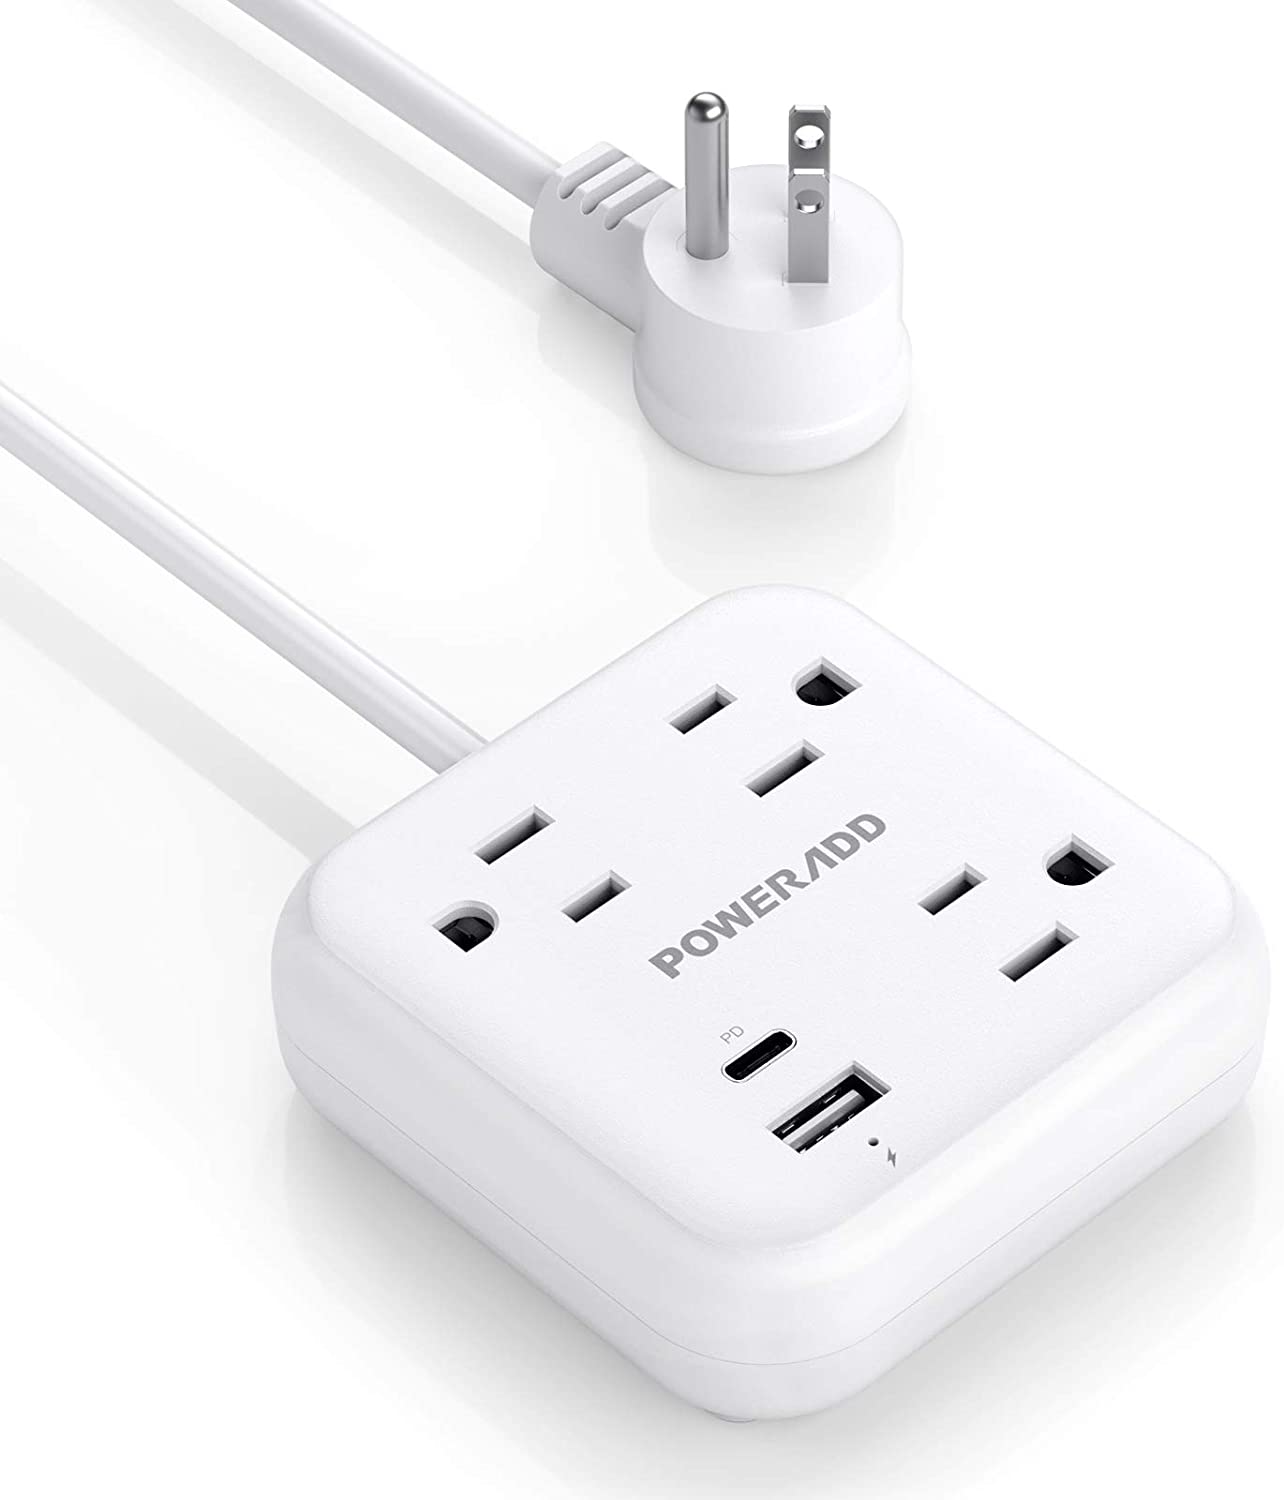 POWERADD Travel Adapter, Wall Outlet with Shelf, Surge Protector $8.49-$12.49